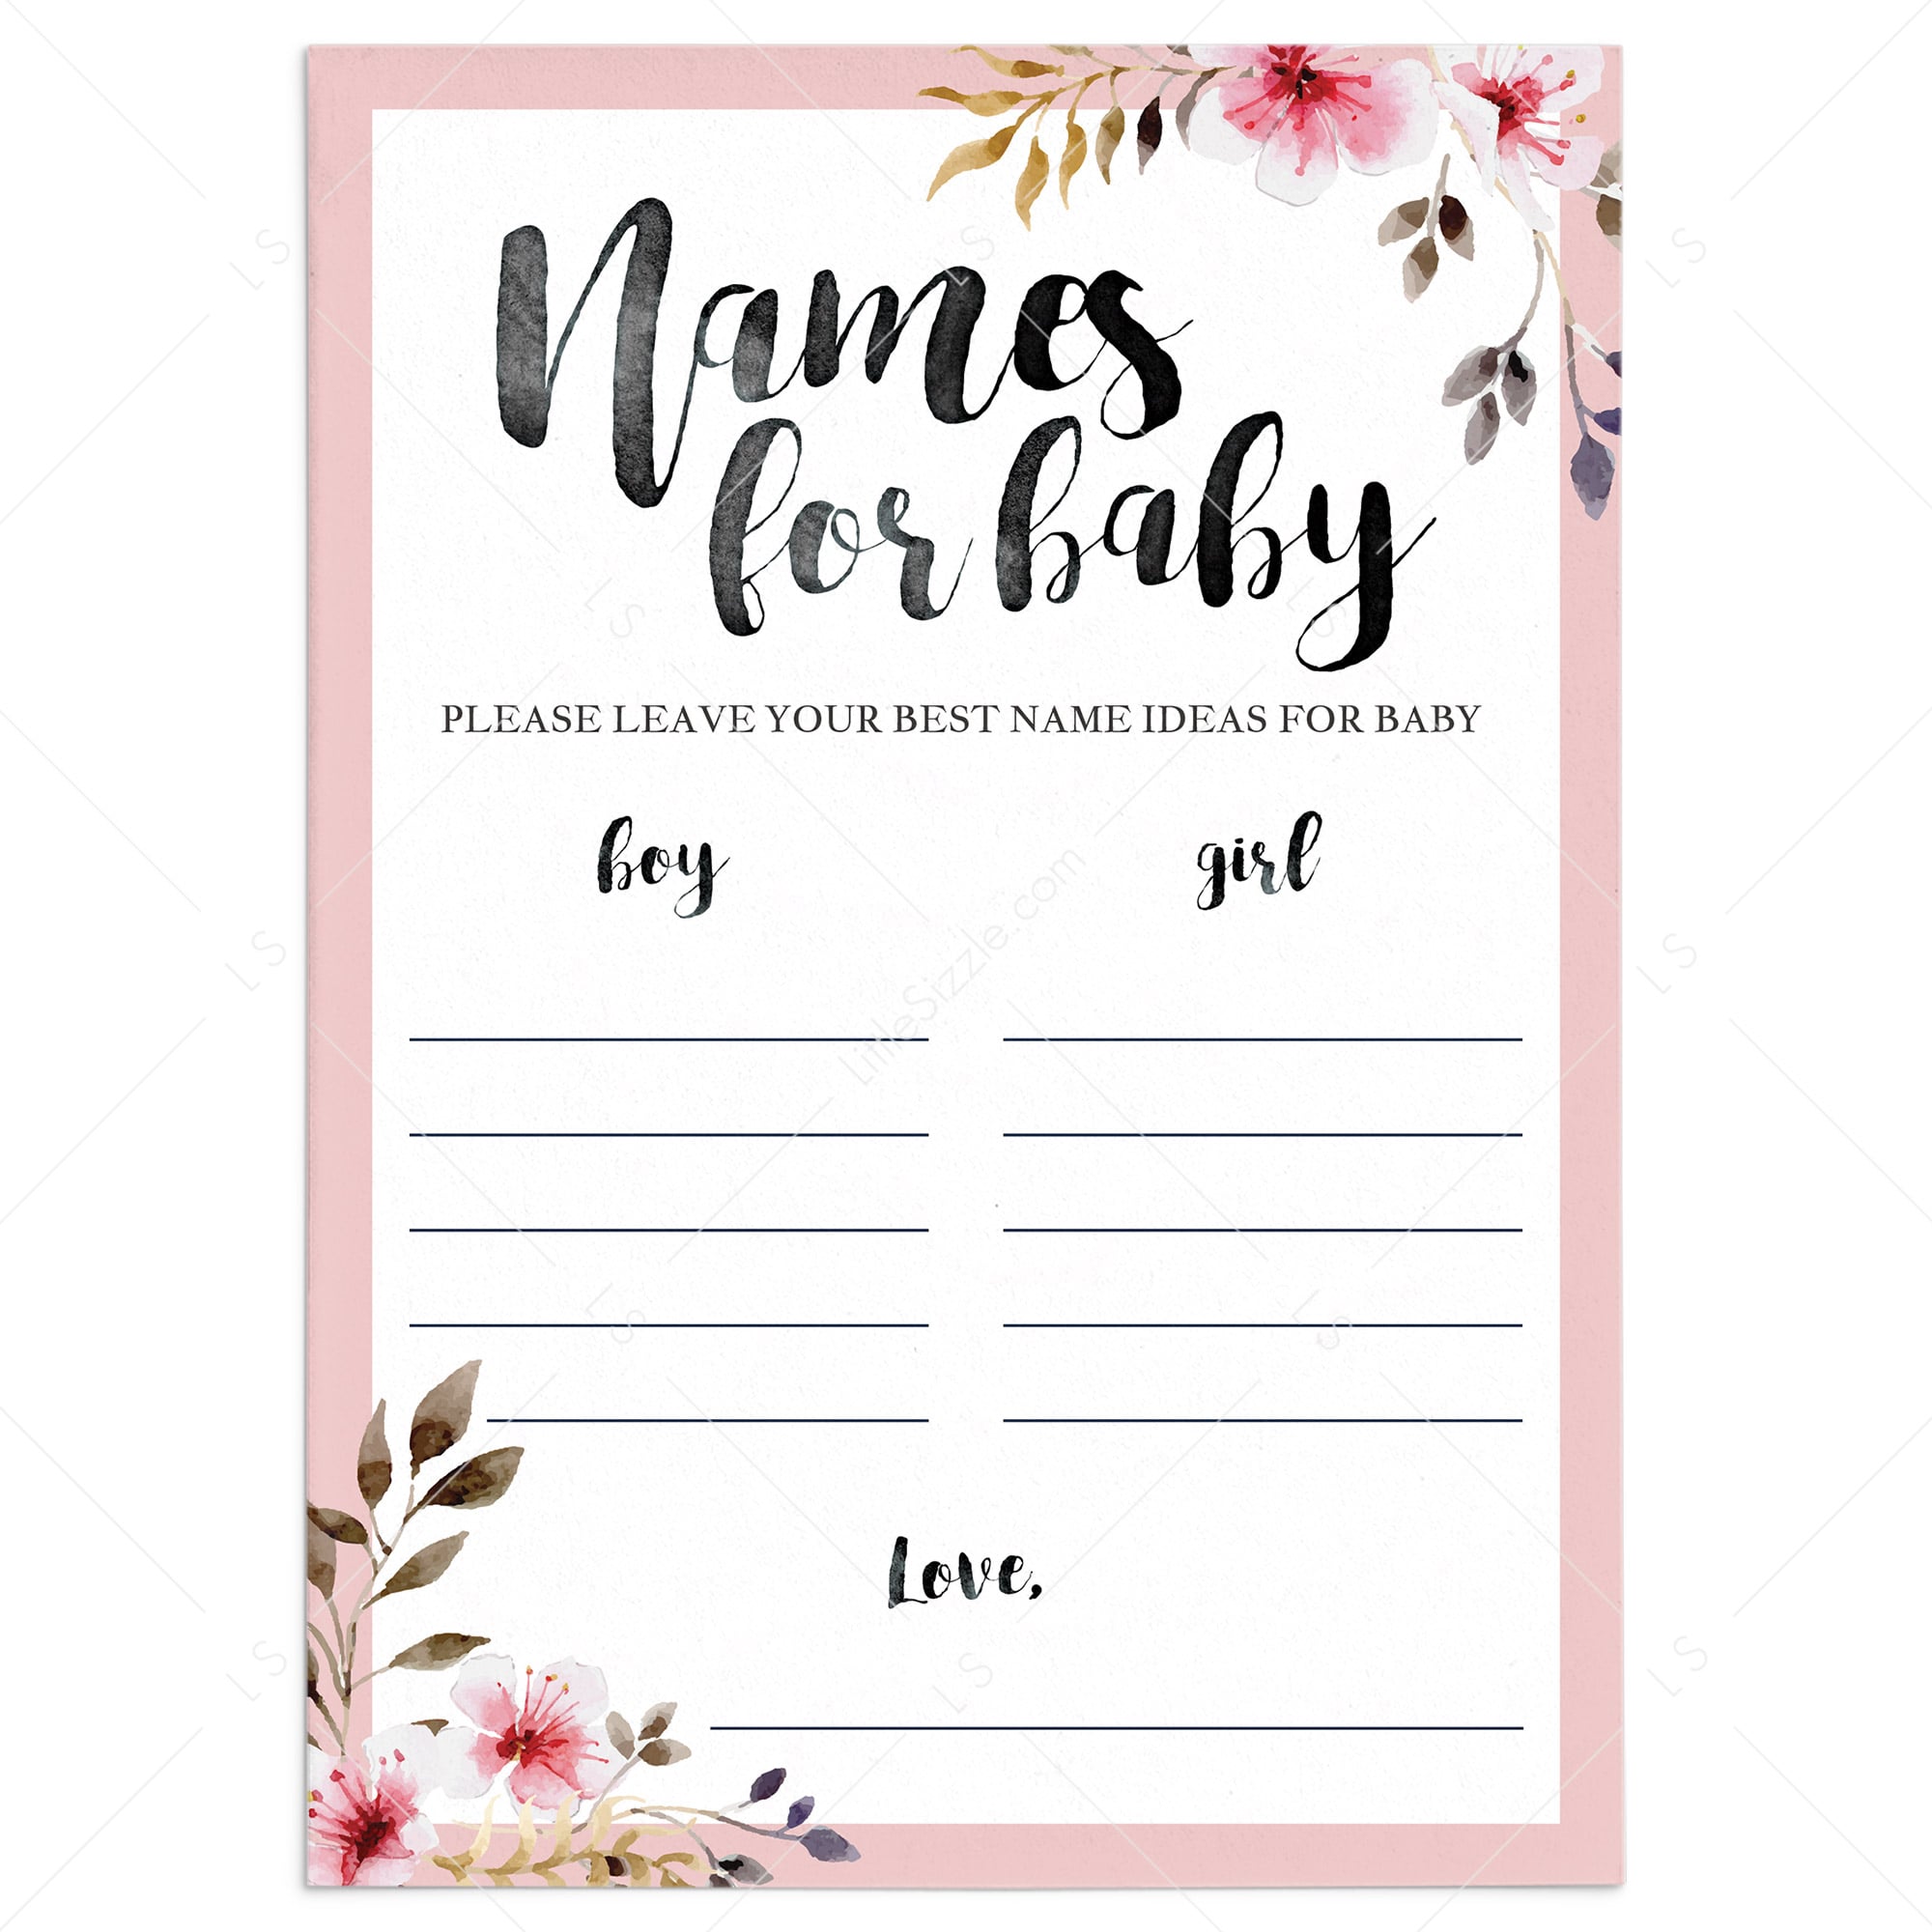 Pink baby shower name game printable download by LittleSizzle